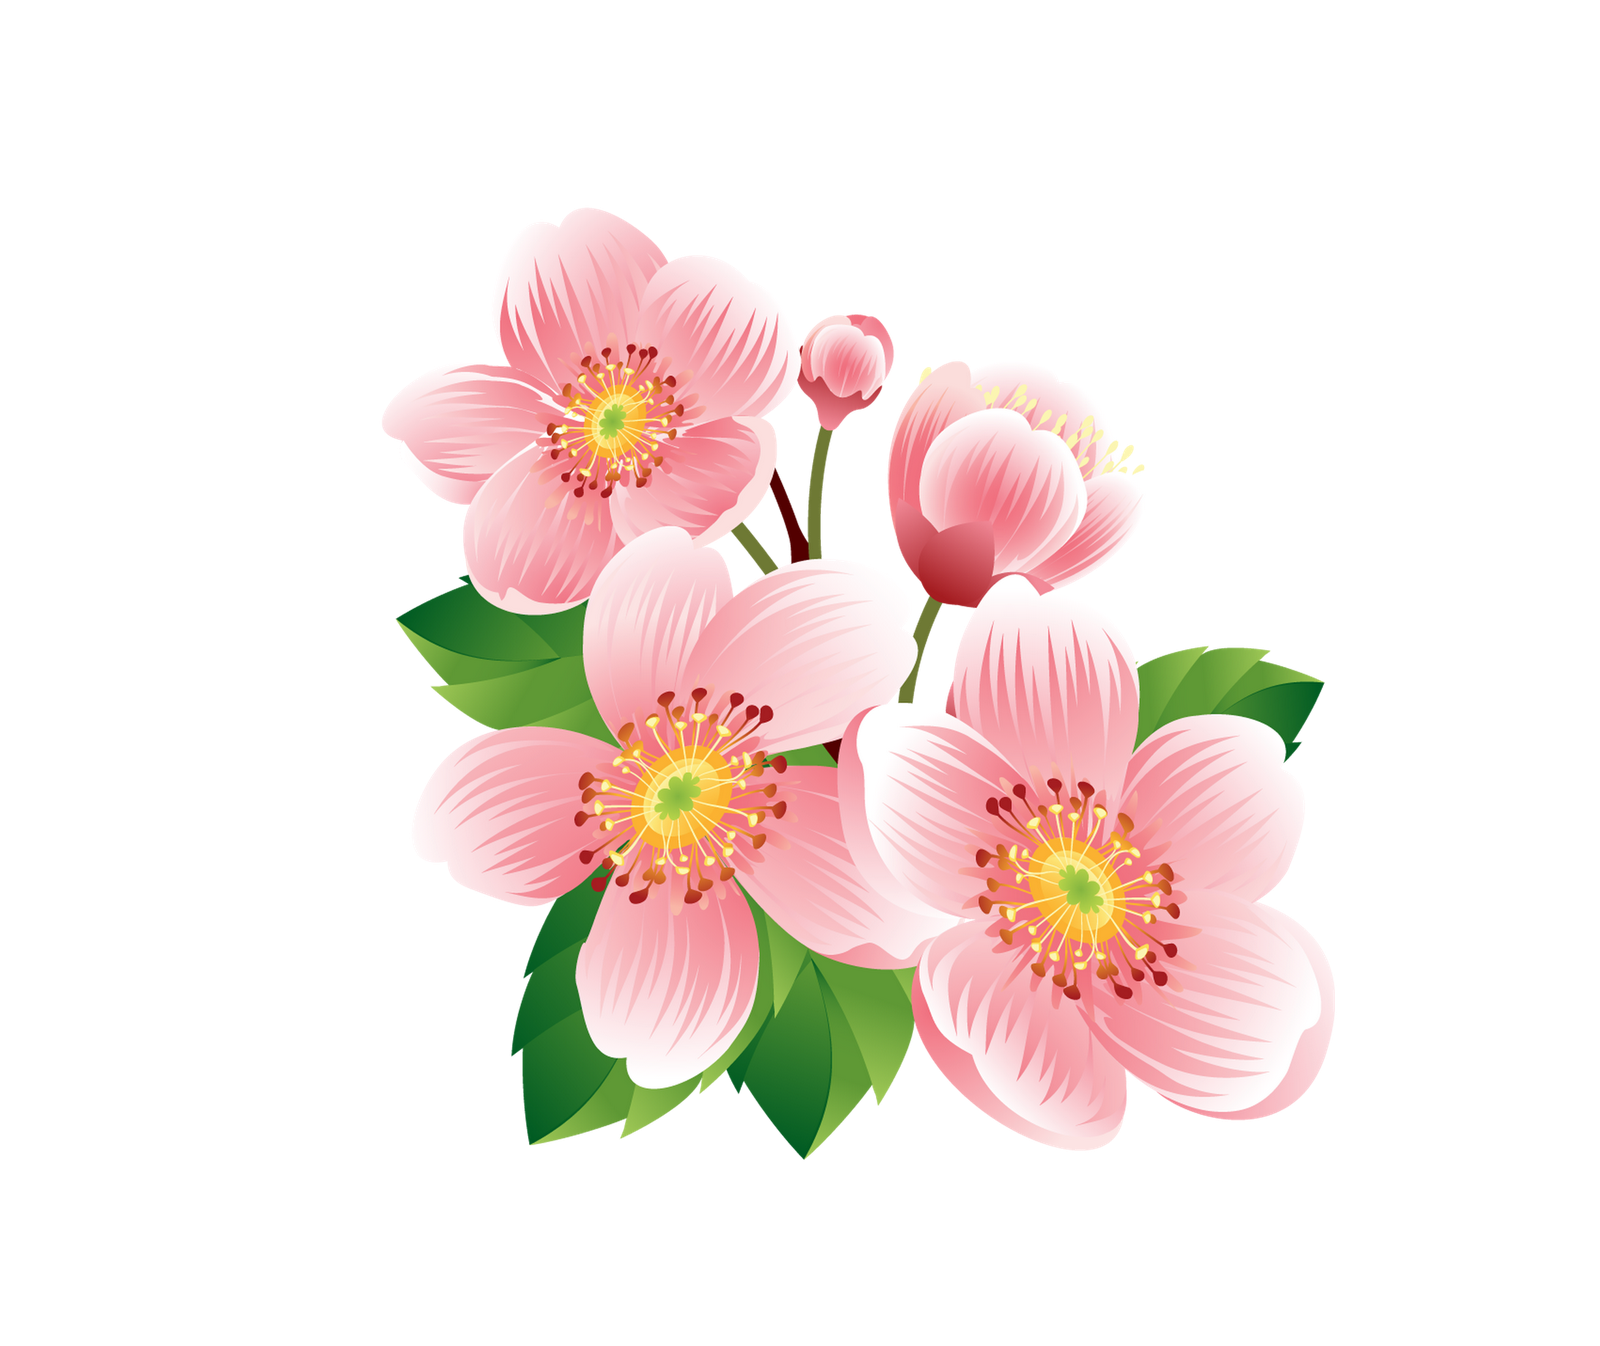 flower clipart for photoshop - photo #31